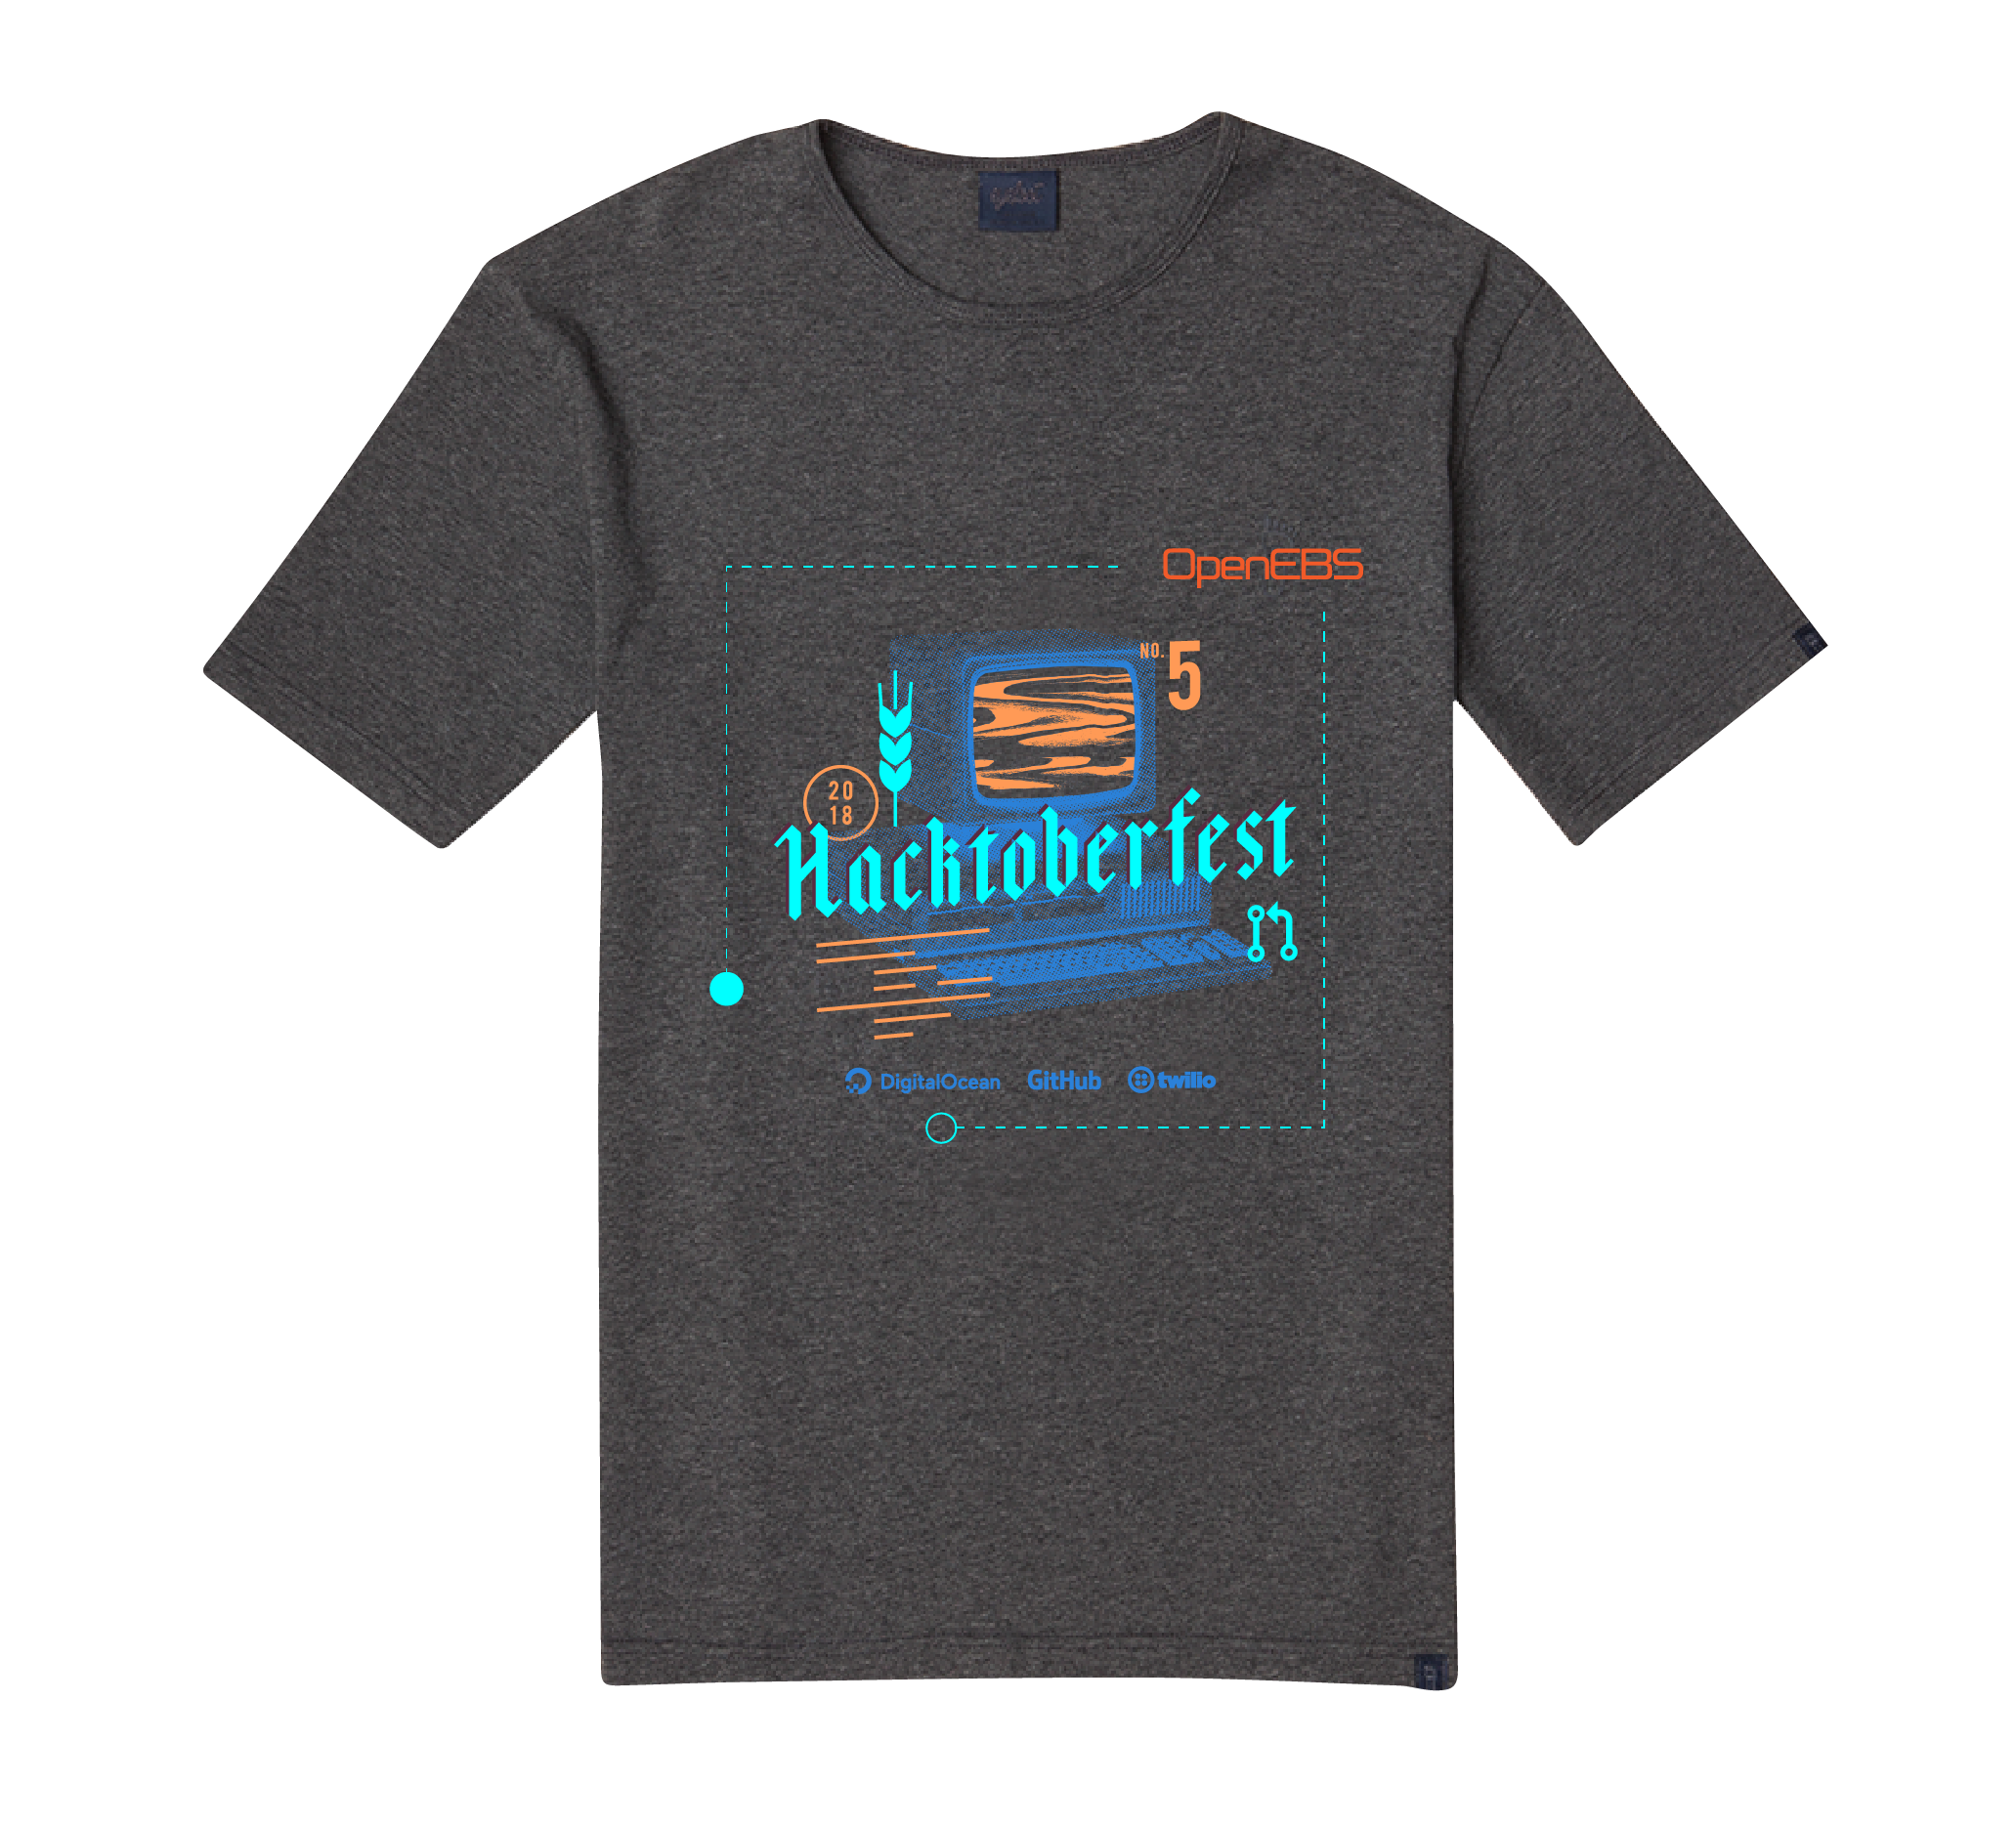 Previous year&rsquo;s Hacktoberfest shirt